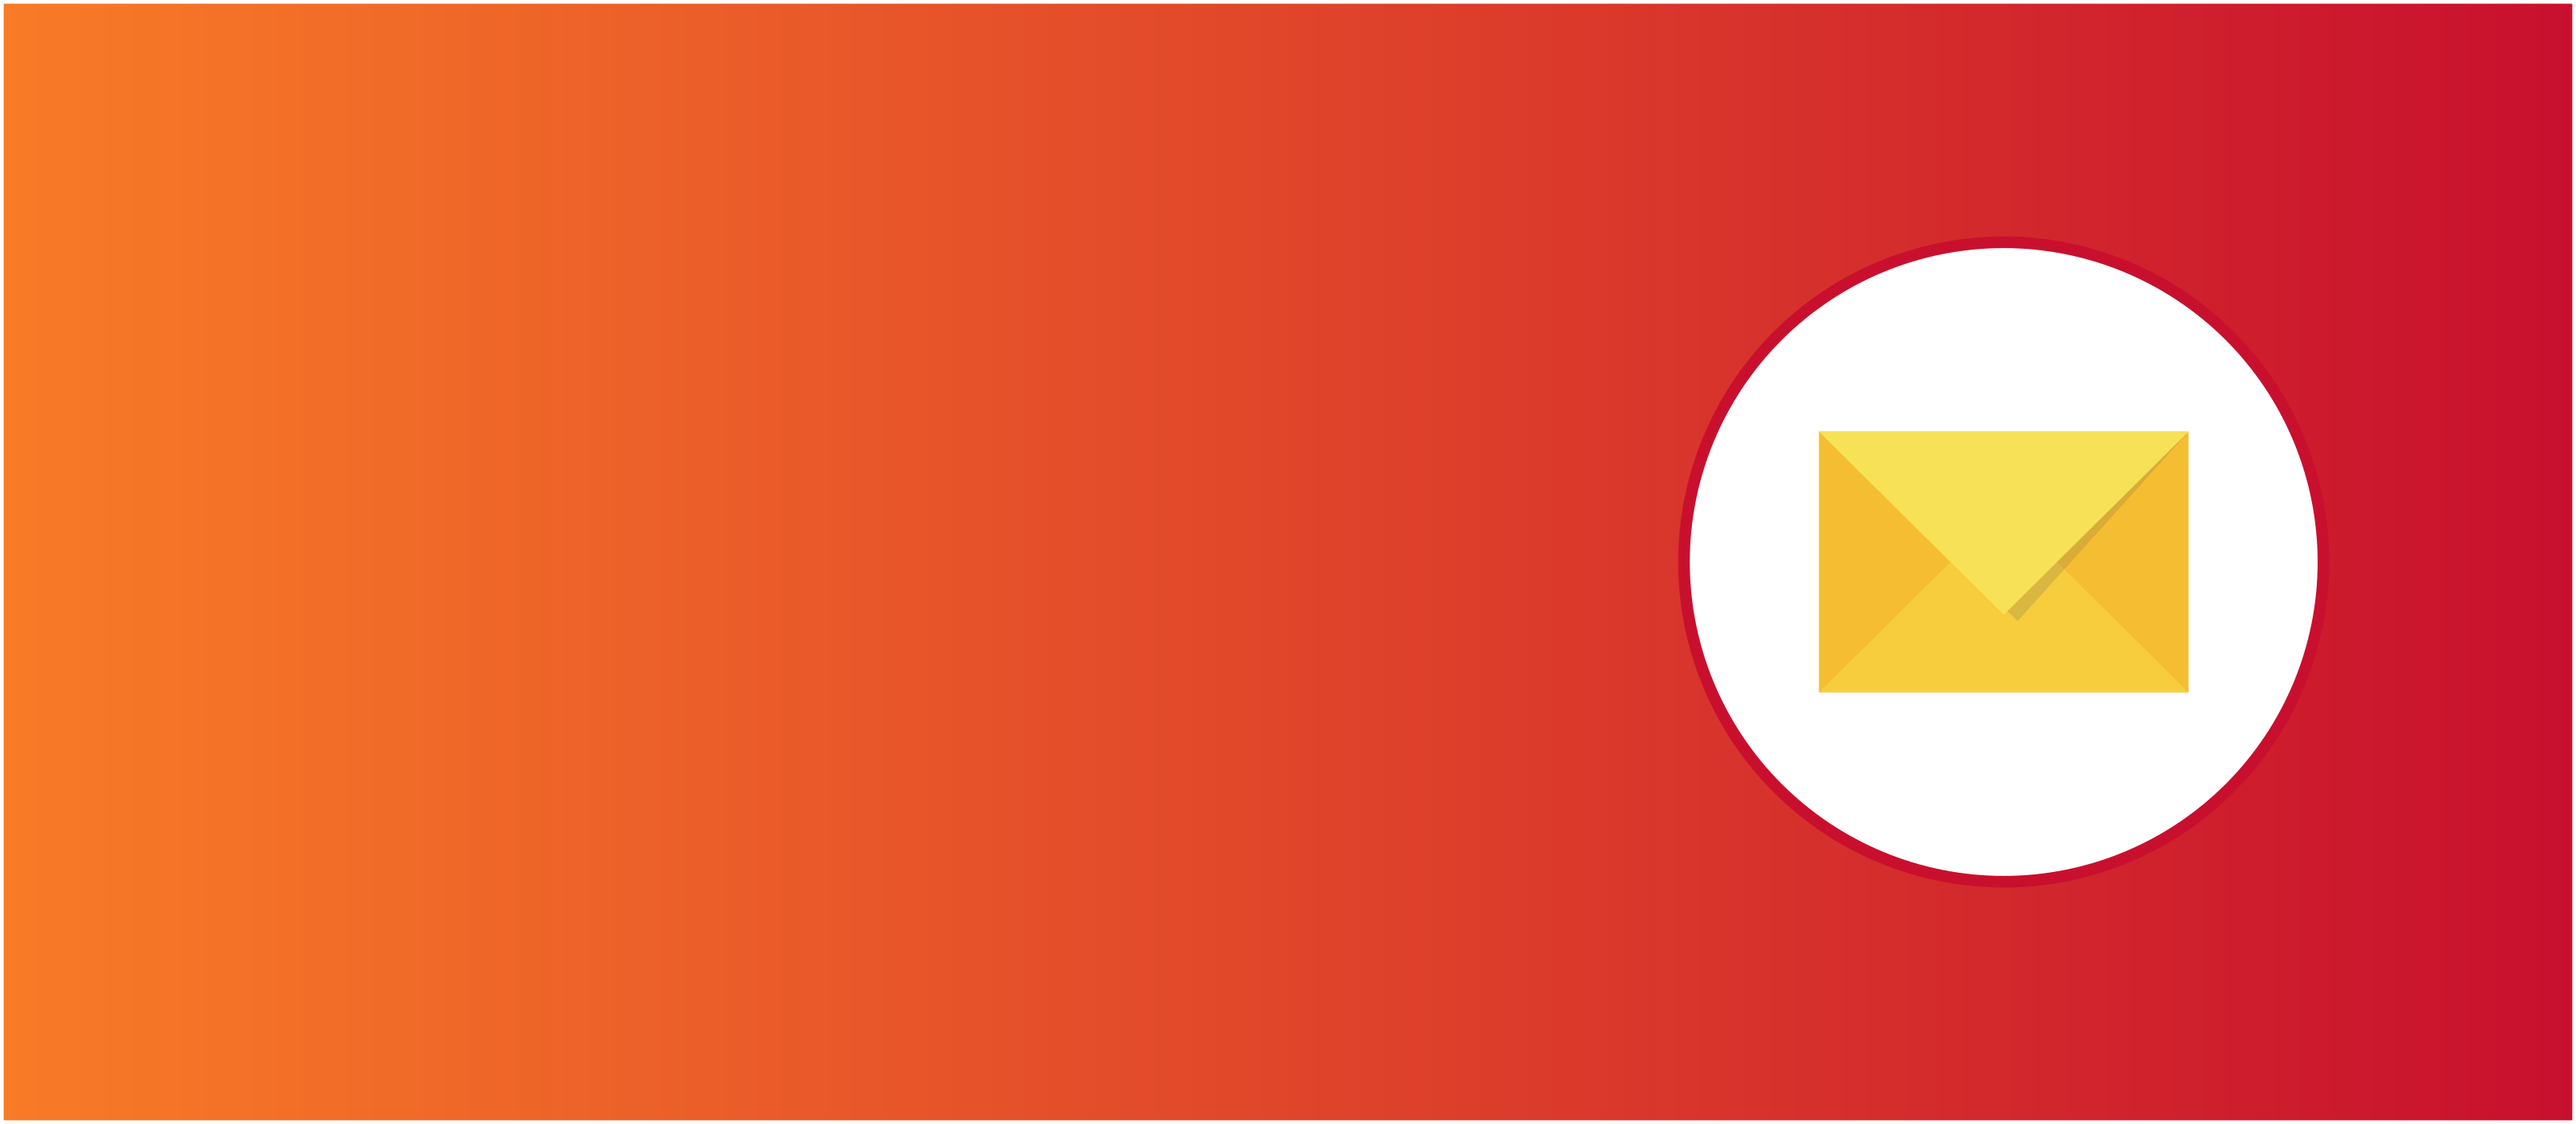 Icon of a yellow envelope on a background of orange-to-red gradient